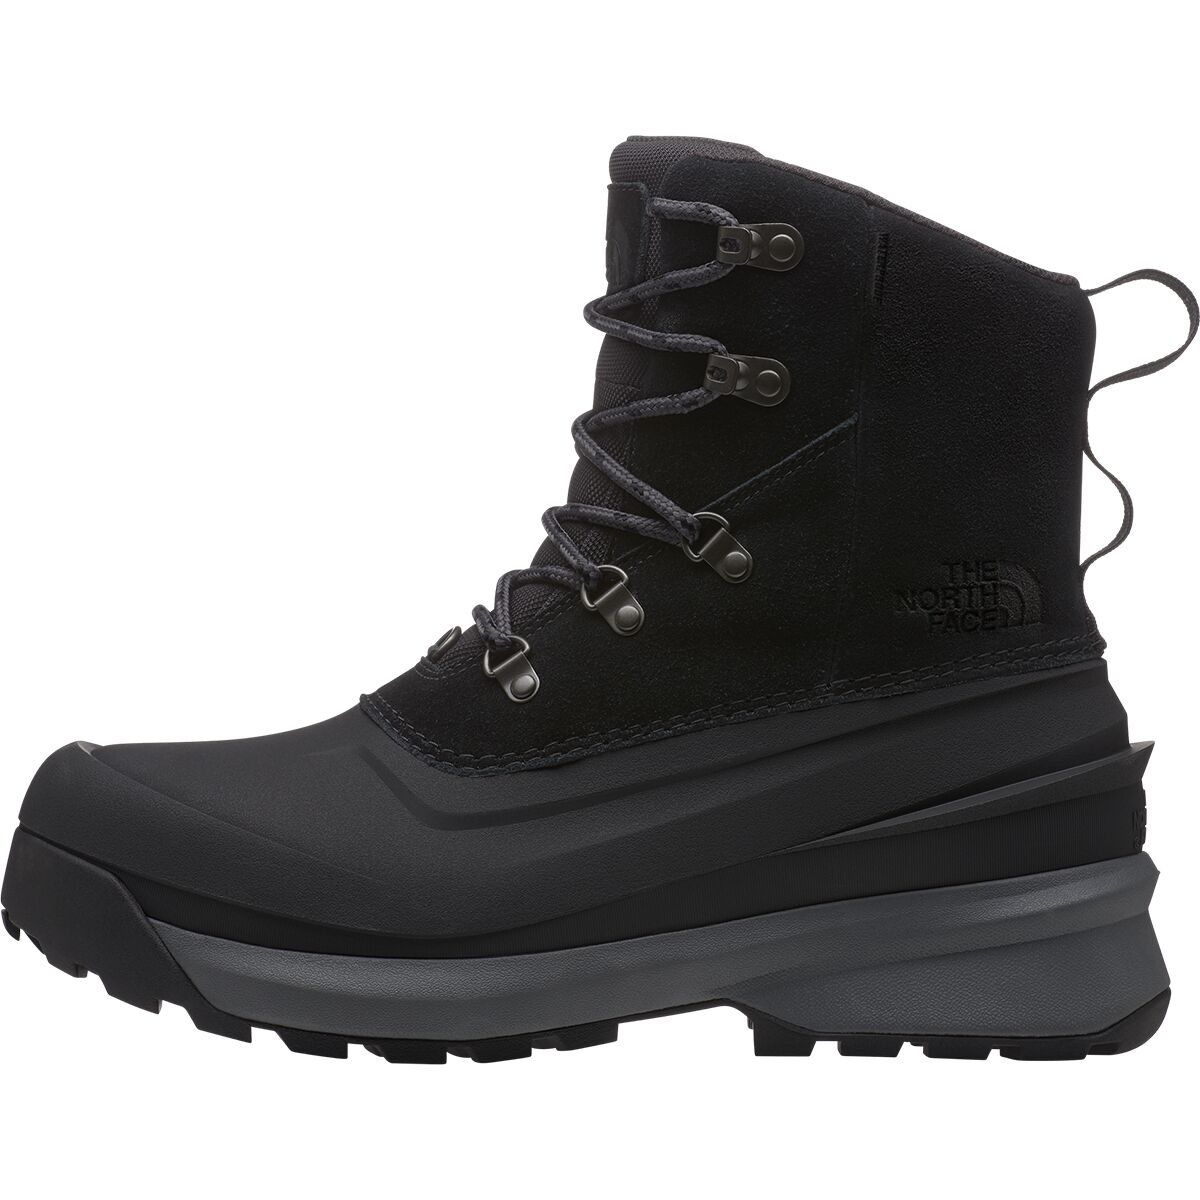 The North Face Chilkat V Lace WP Boot - Men's